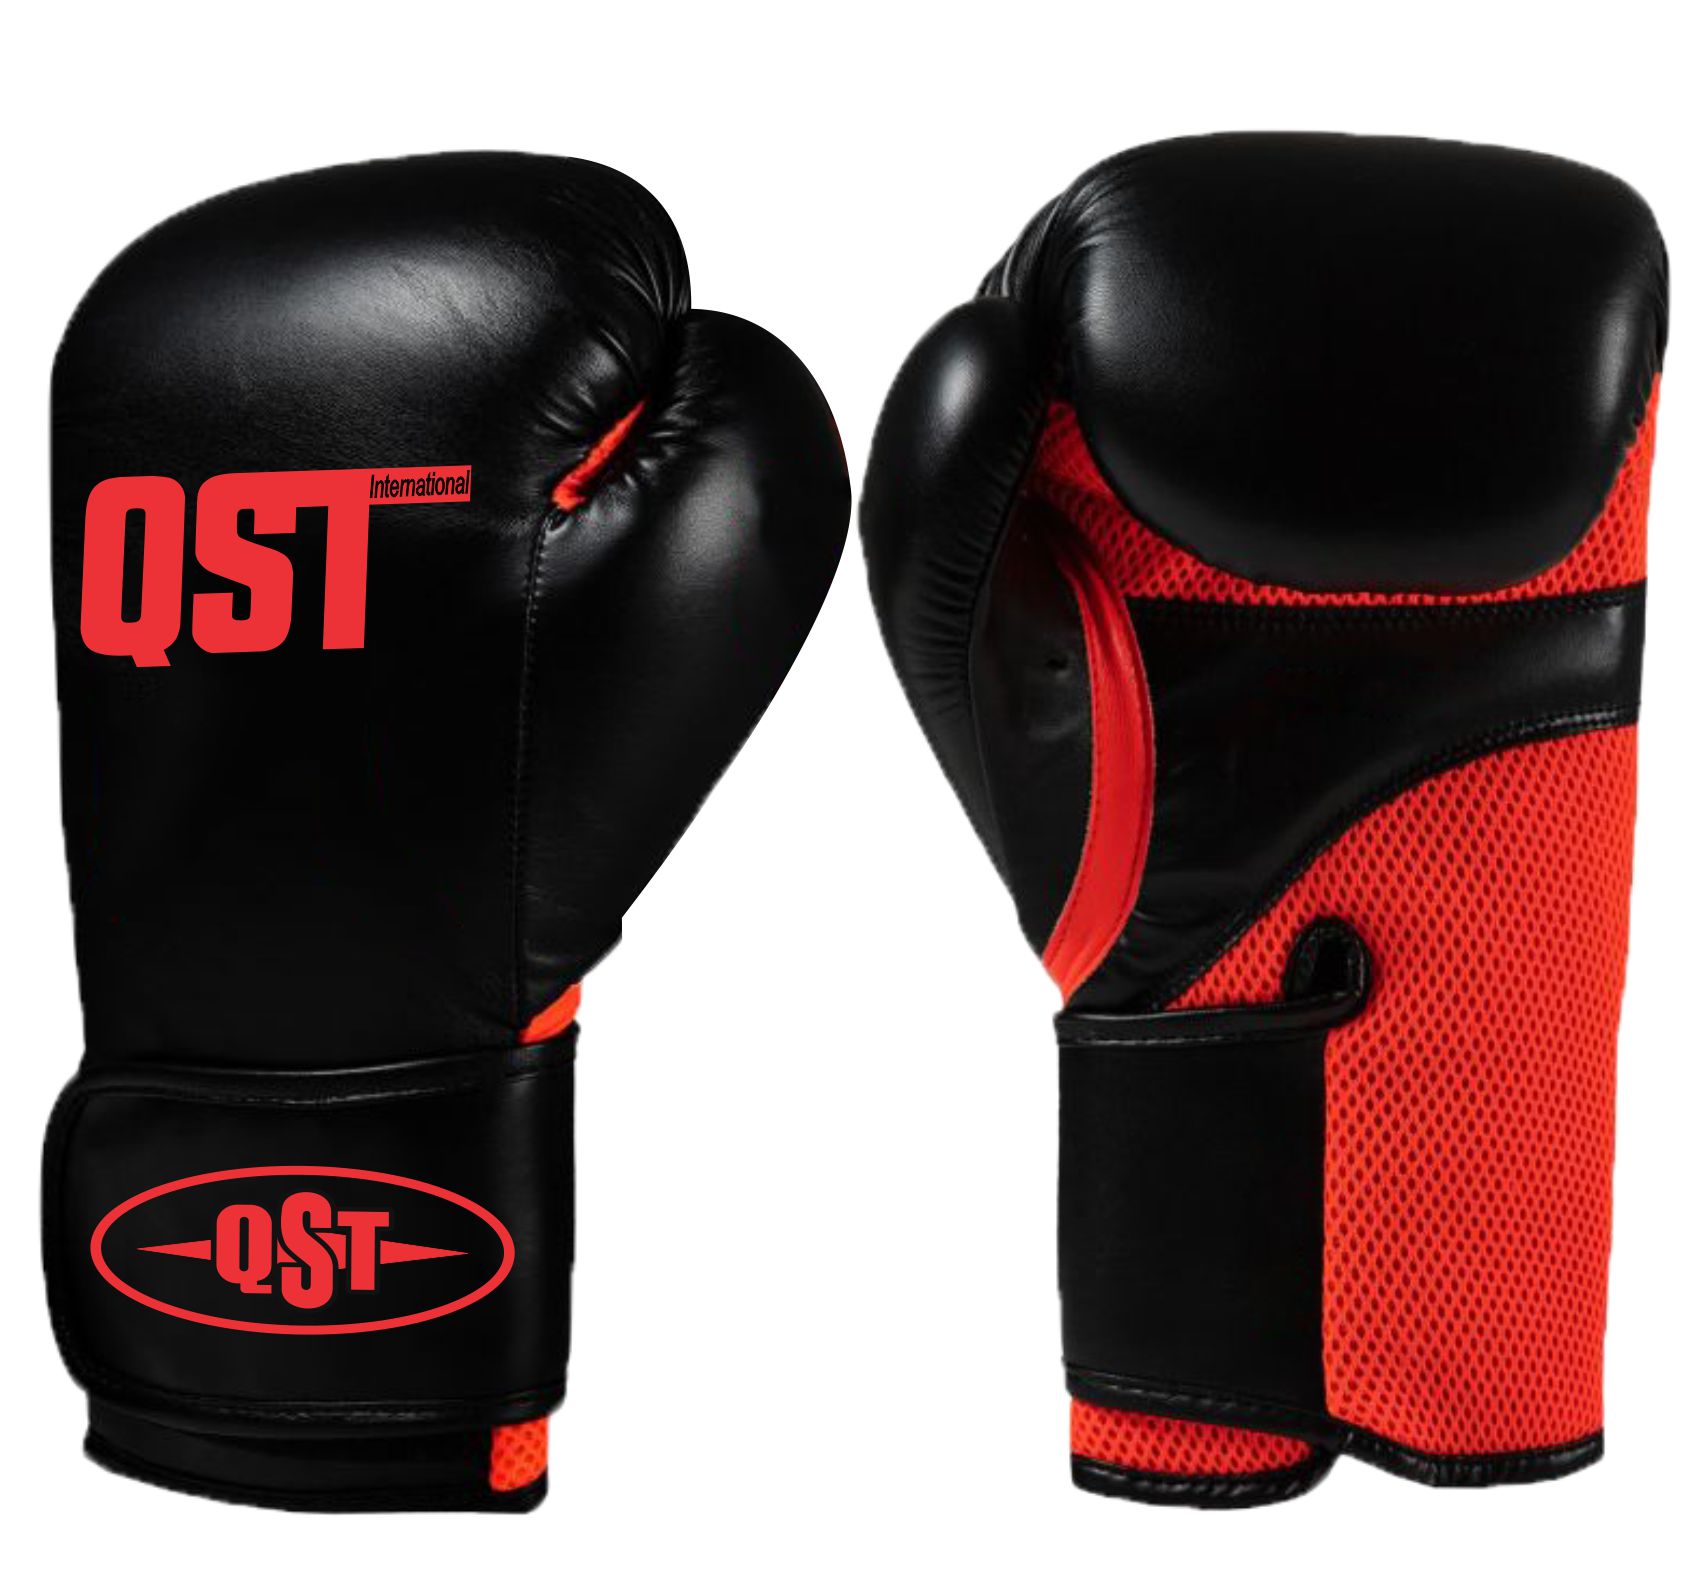 Professional Boxing Gloves - PRG-1519